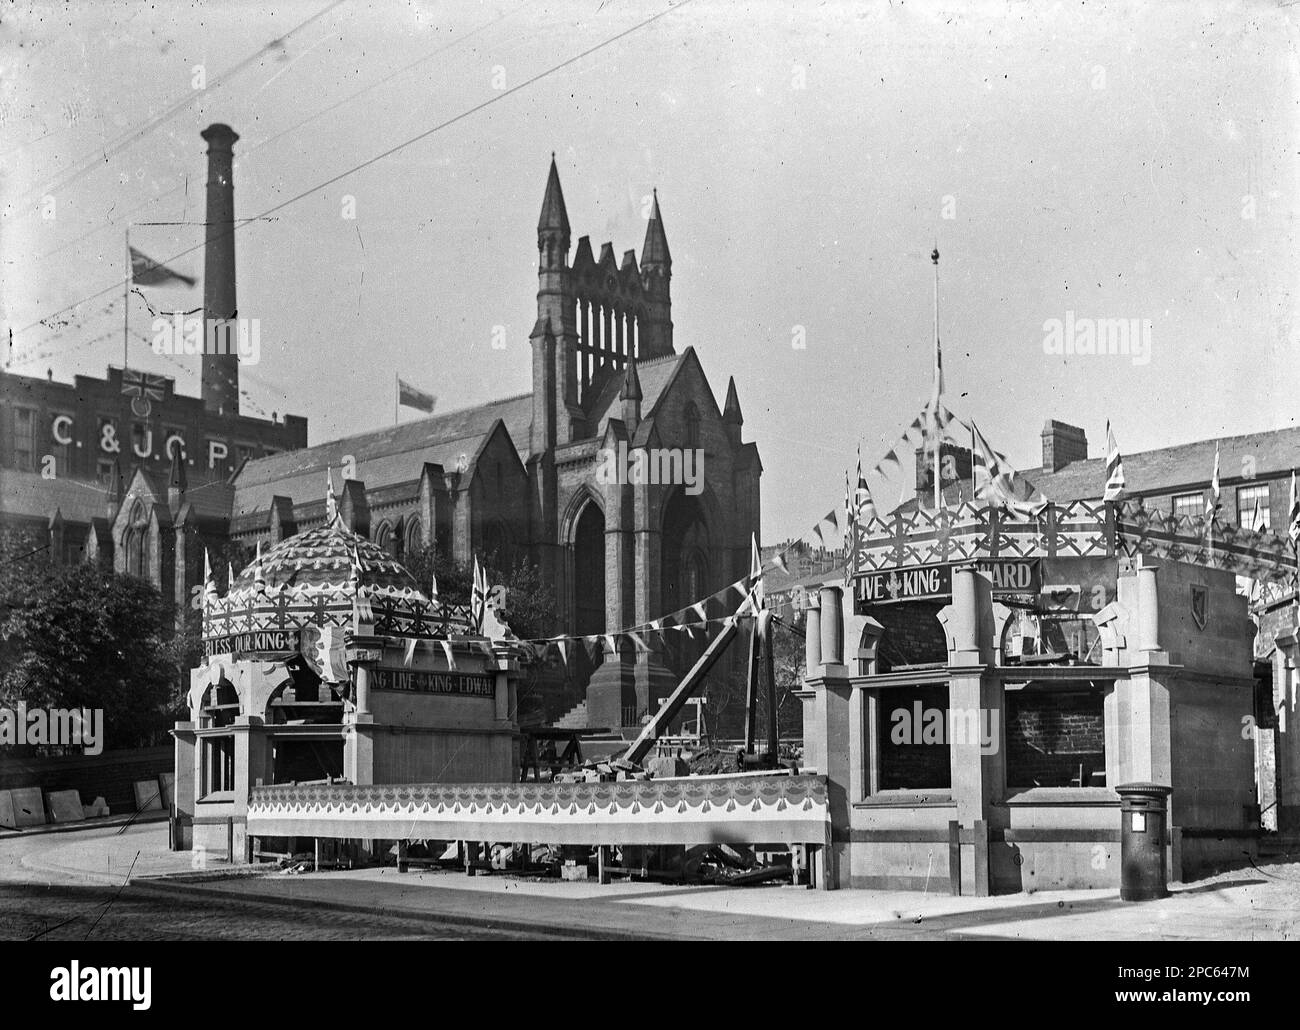 Around the UK -, Building of the Boar War Memorial, Bolton Road, Darwen, Lancashire, UK Preparation & events relating to the Coronation of King Edward VII in 1902 Stock Photo